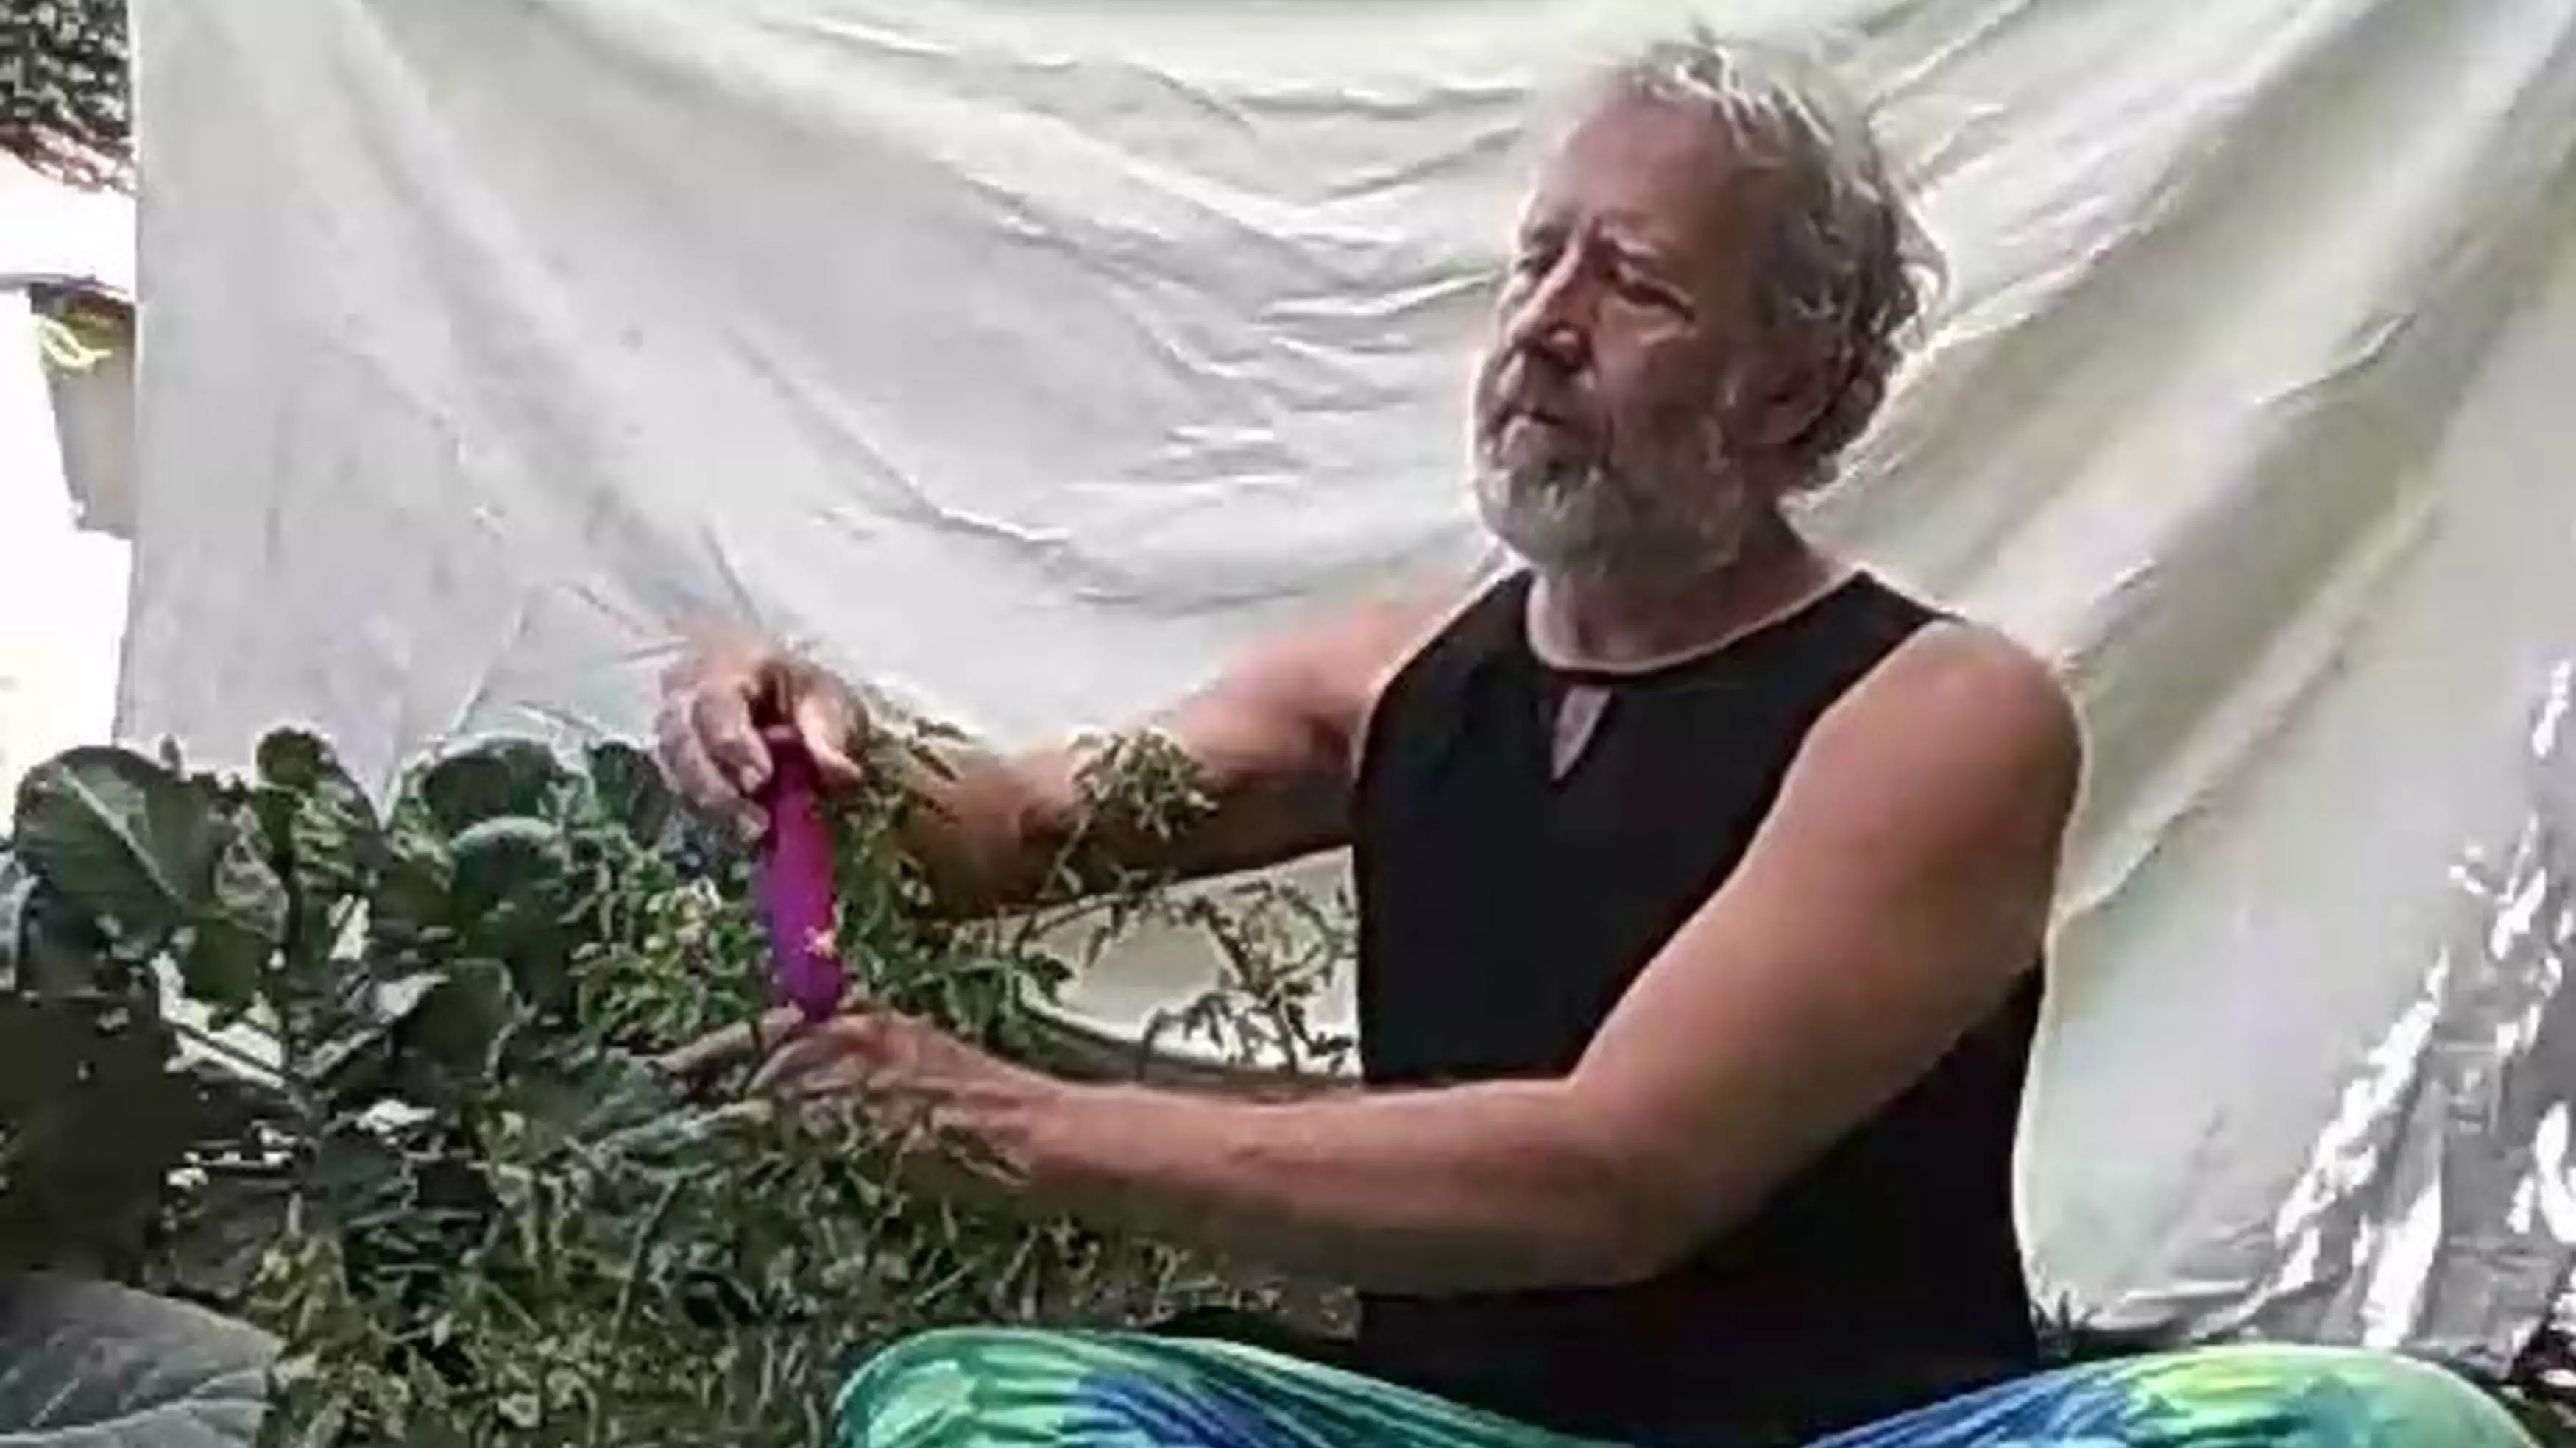 Farmer Reveals He Tickles His Plants With A Vibrator To Improve His Crop